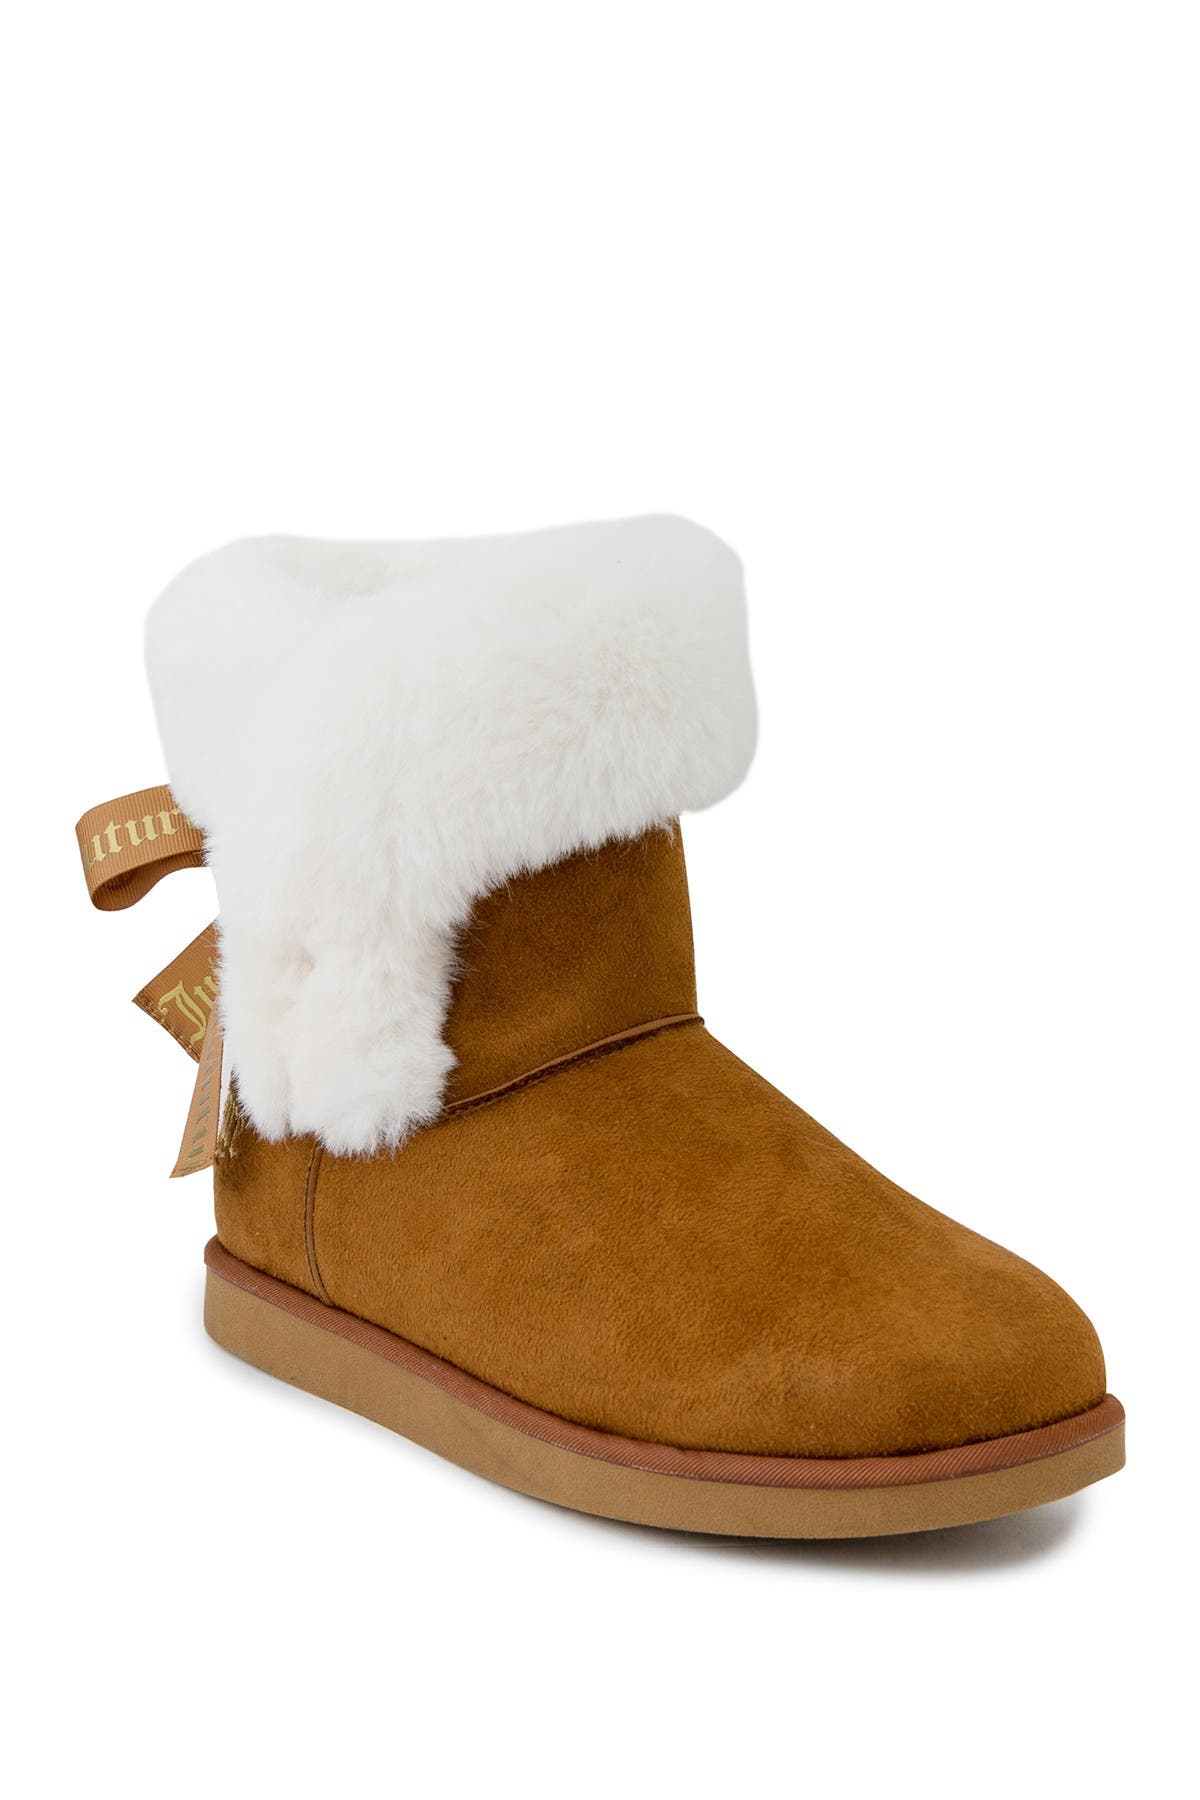 Juicy Couture | King Winter Boot 